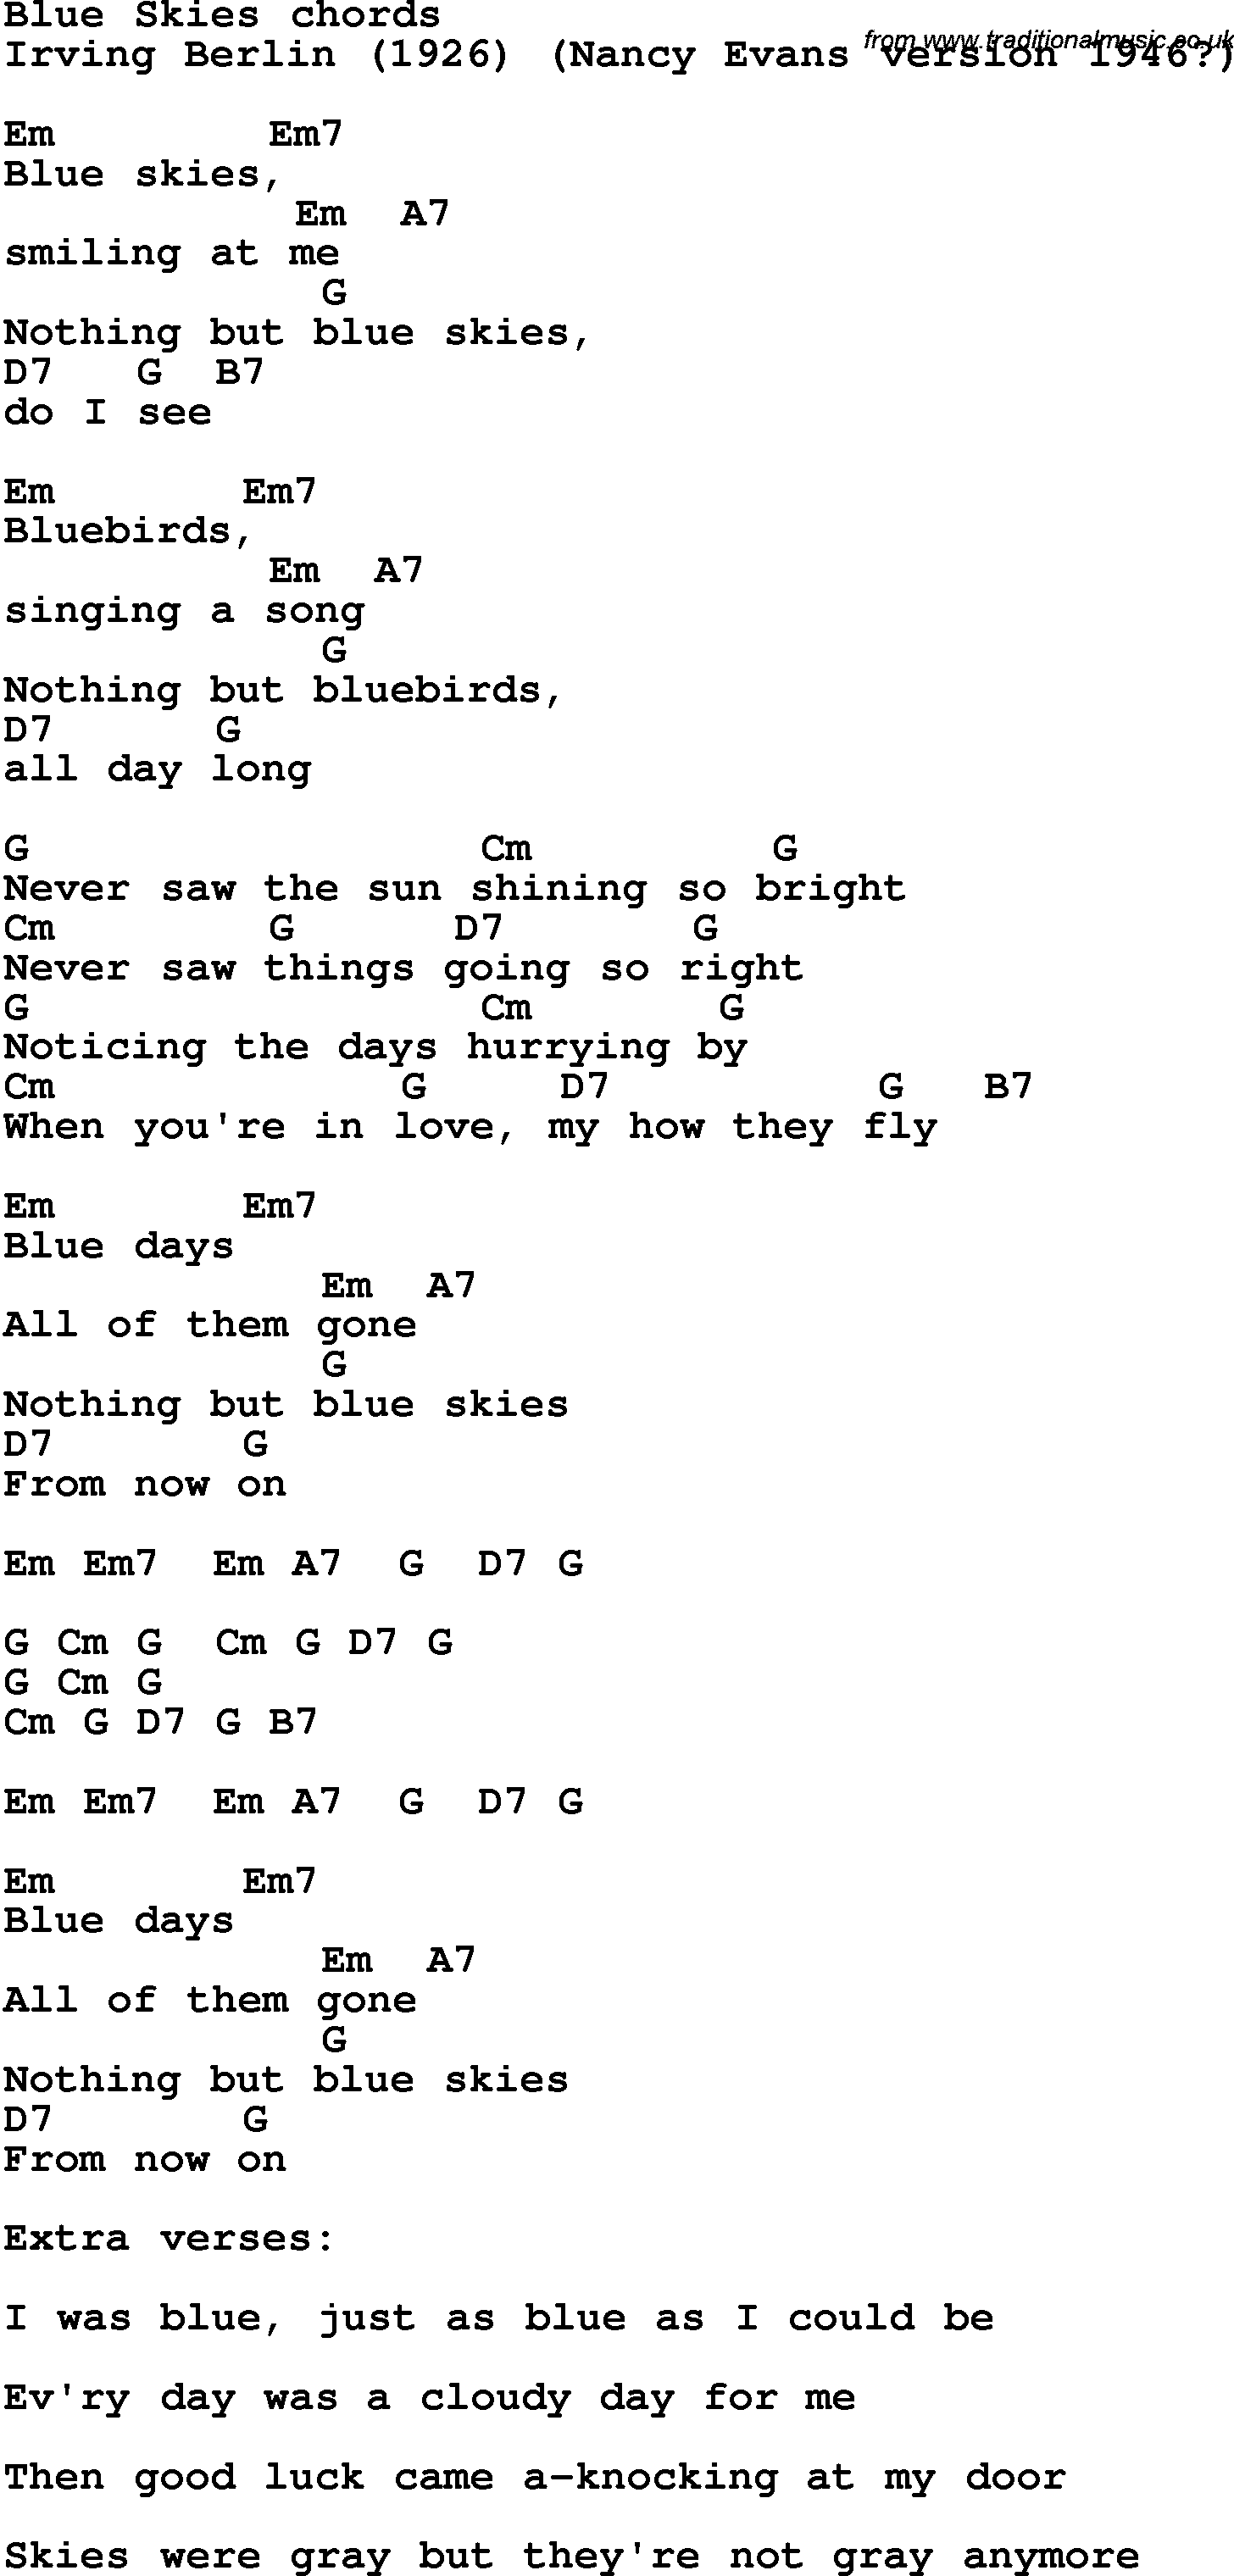 Song Lyrics with guitar chords for Blue Skies - Irving Berlin